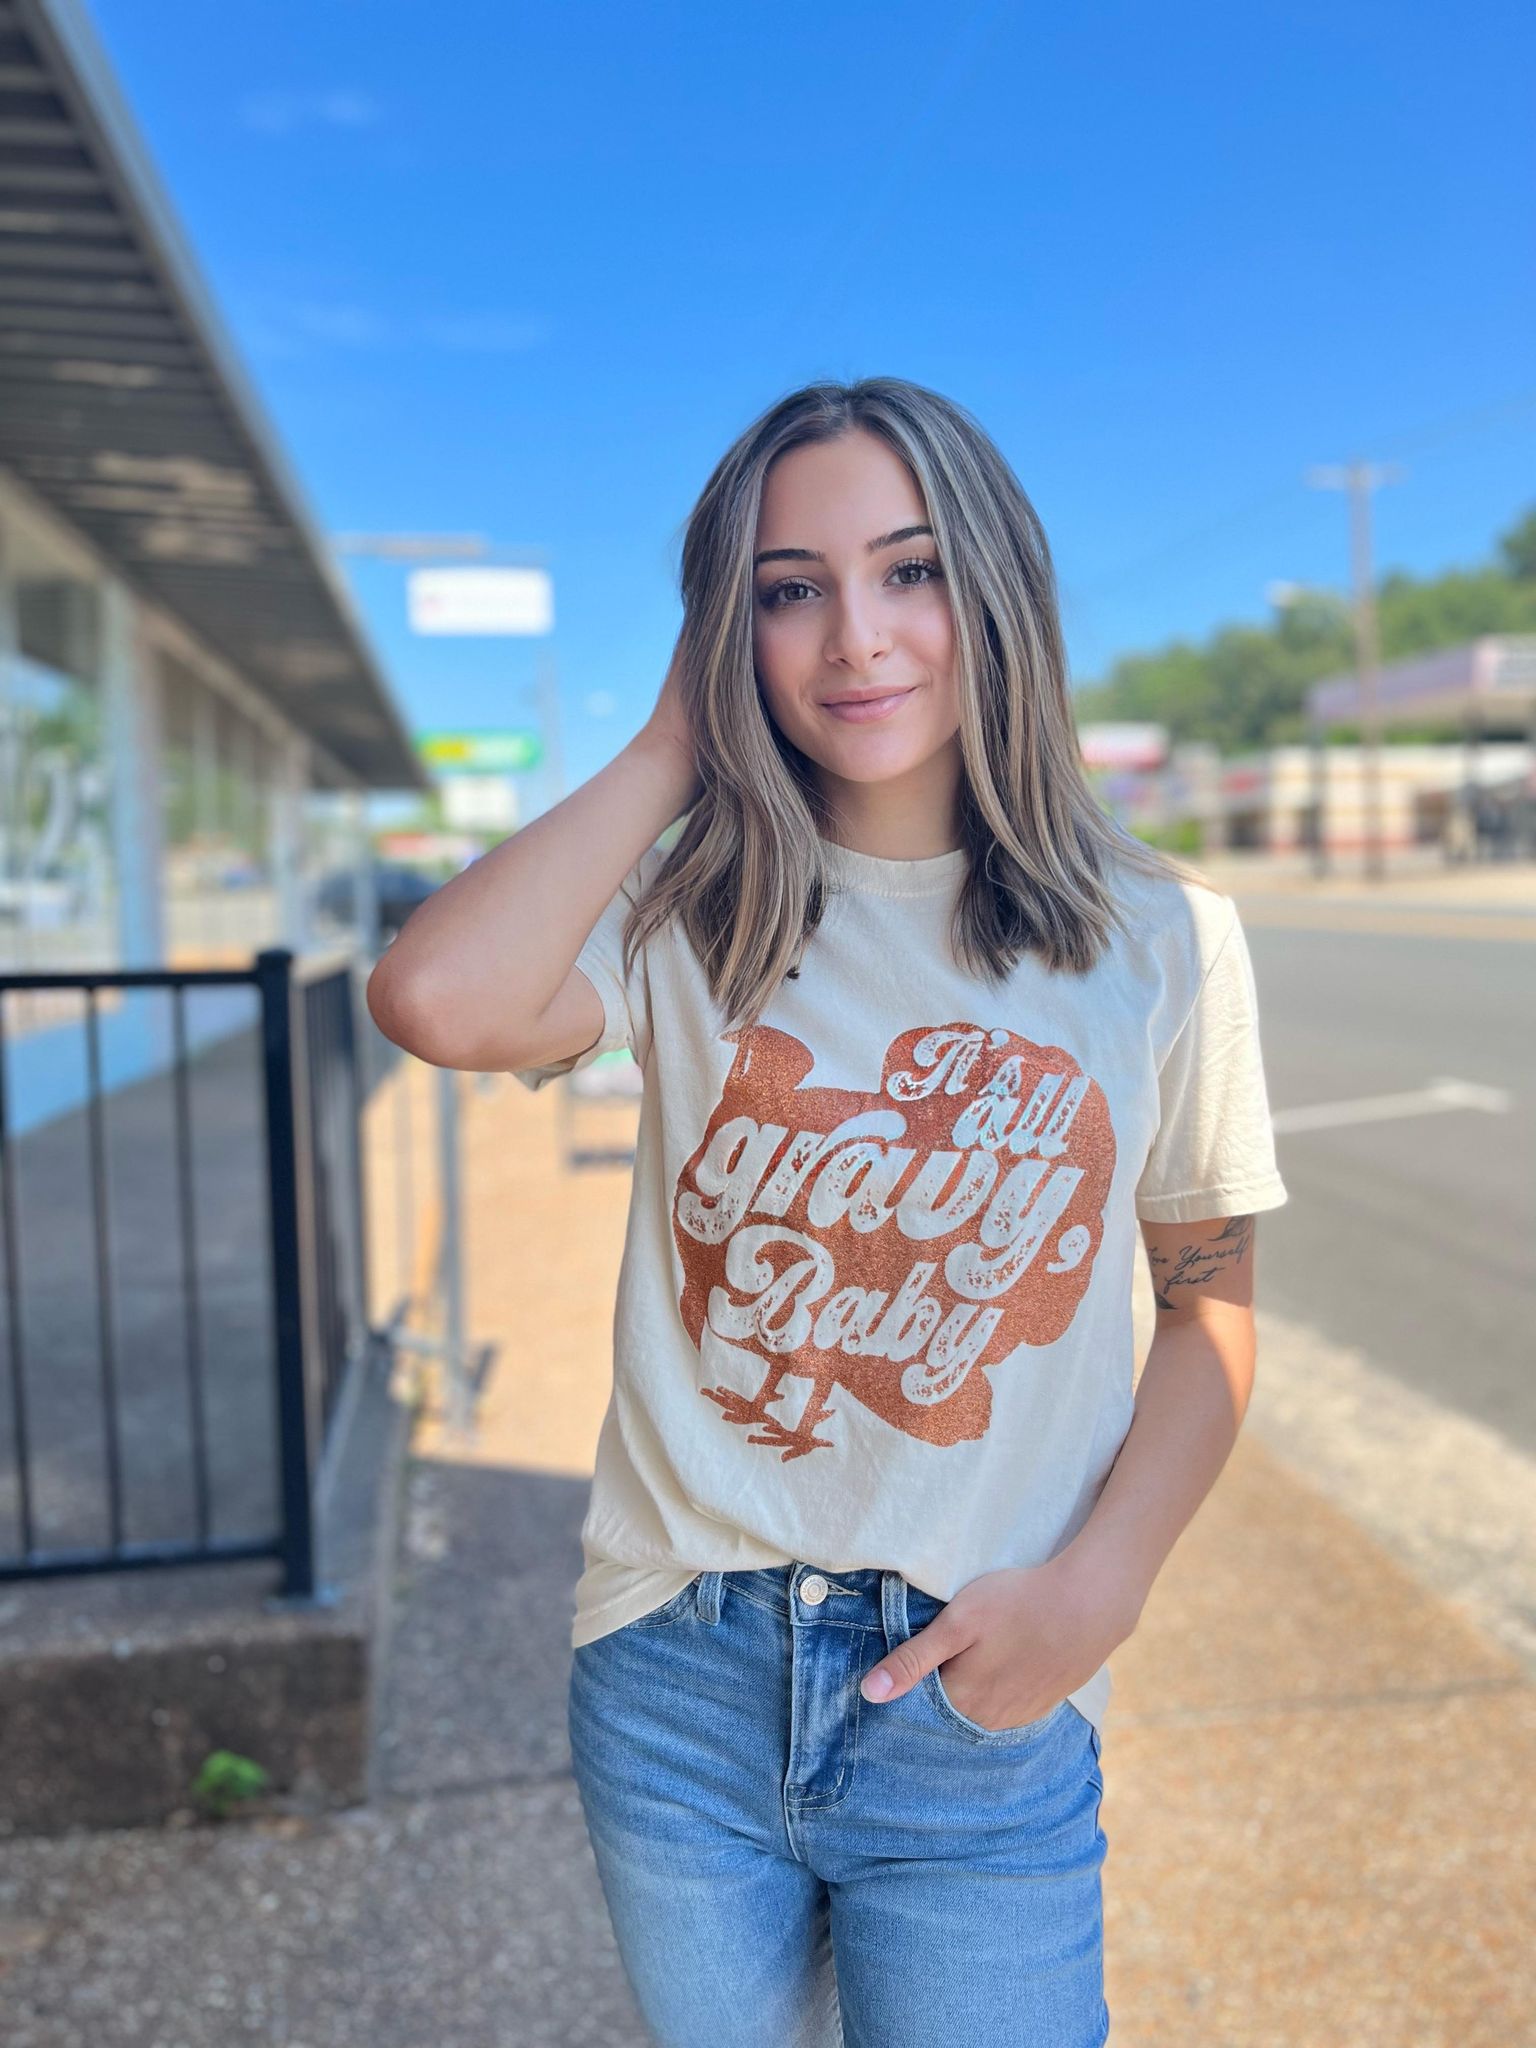 It's All Gravy Baby Tee-ask apparel wholesale